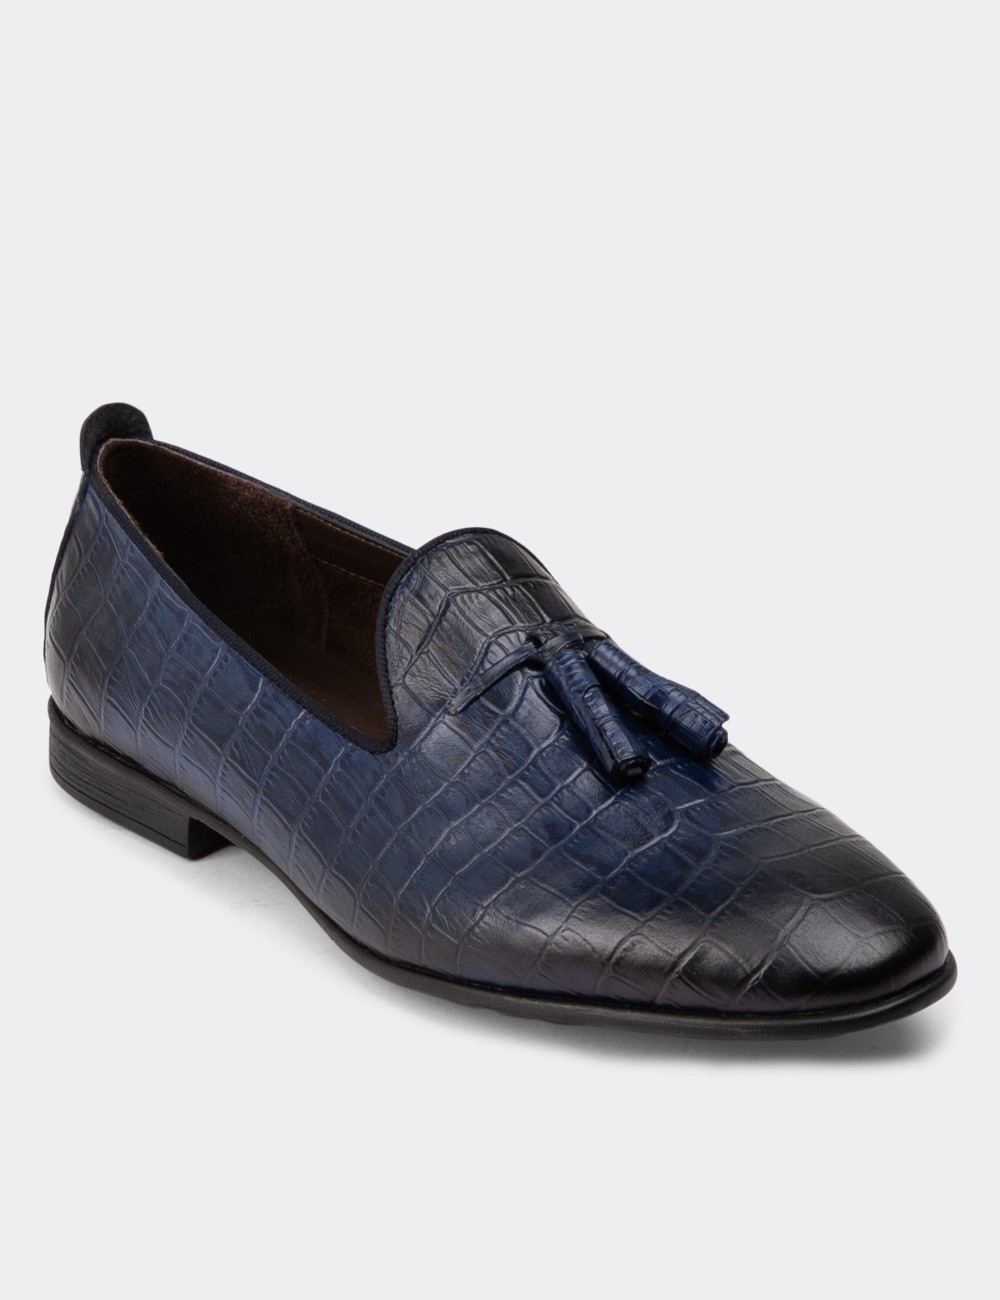 Blue Leather Loafers Shoes - 01702MMVIC01